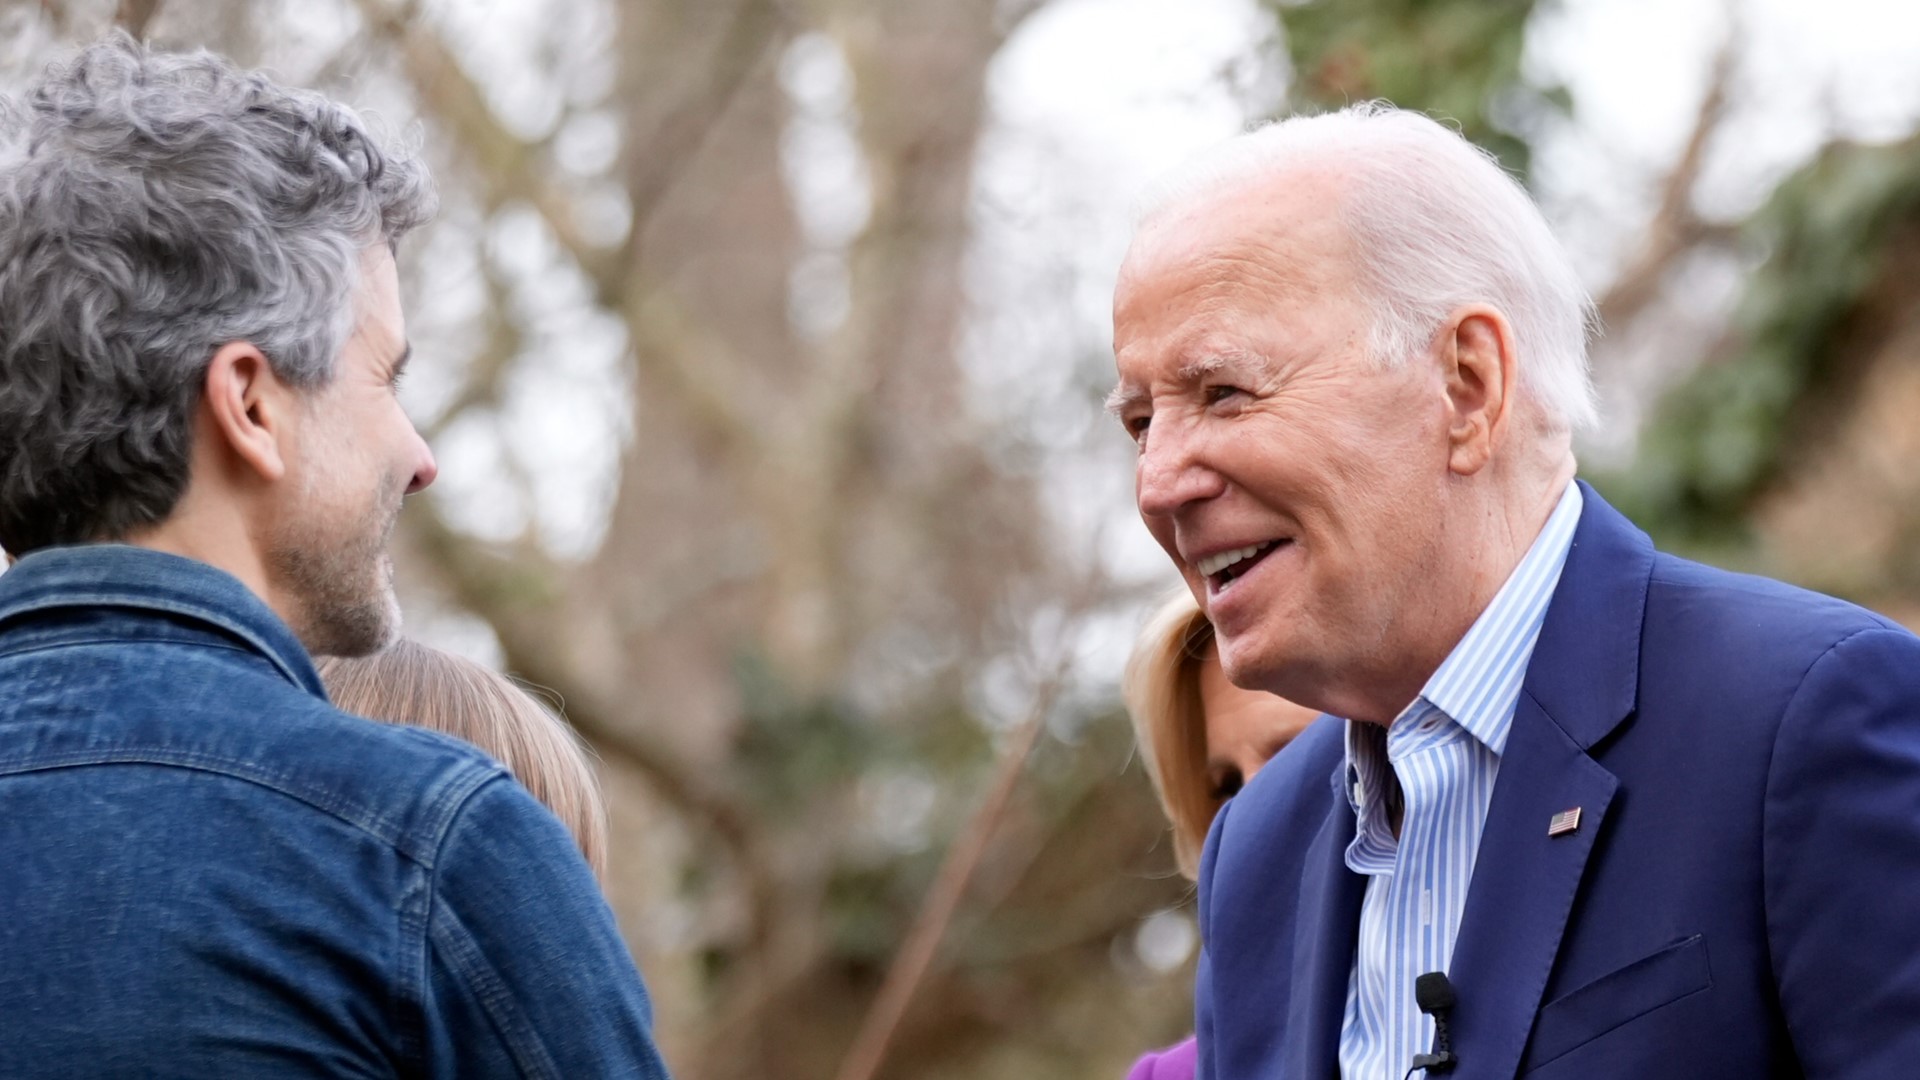 A new campaign ad from President Biden's administration claims his administration helped millions of Americans hundred save on medical expenses.